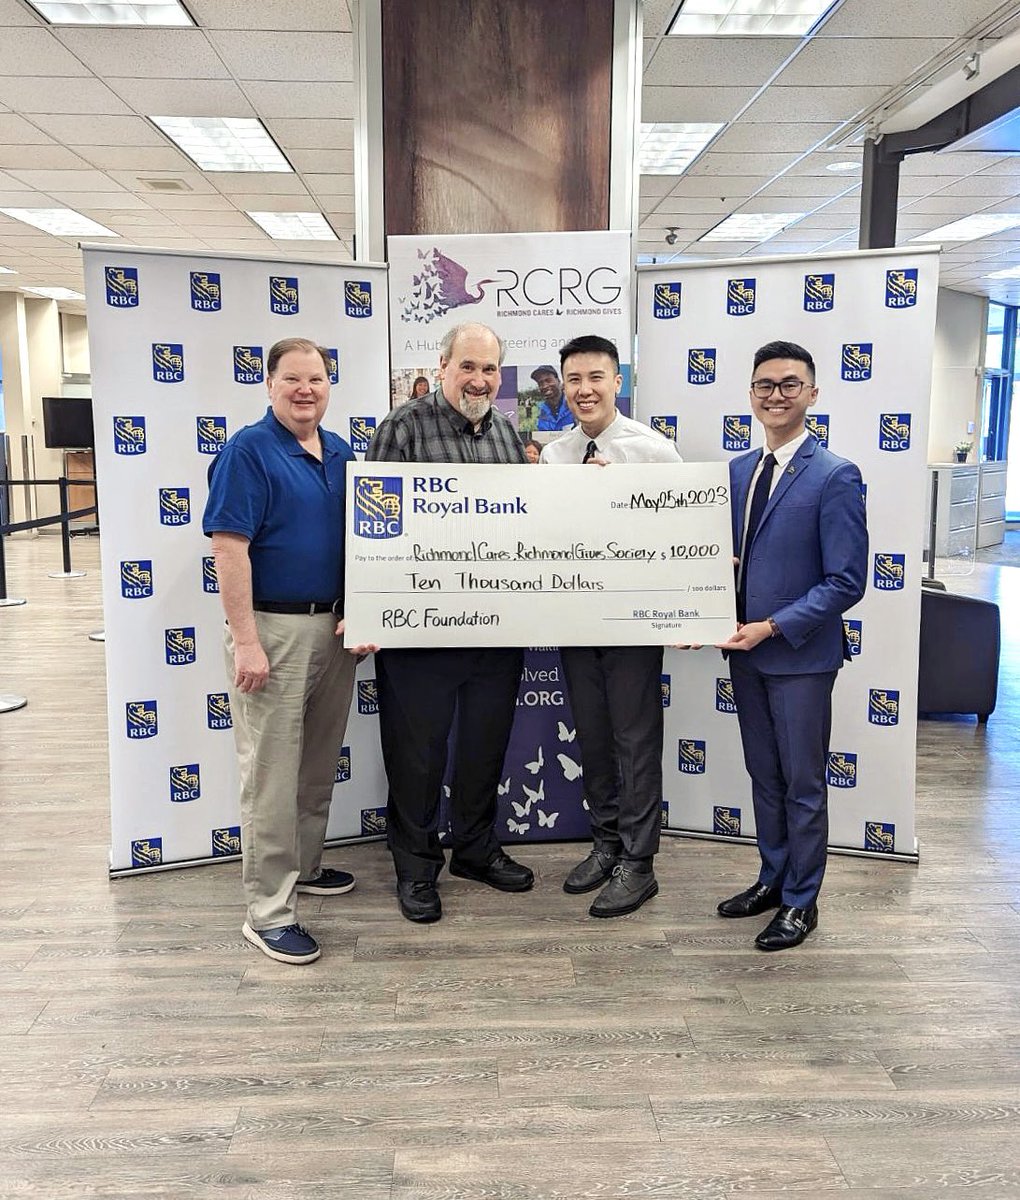 We were pleased to present a $10,000 donation from @RBC Foundation to @rcaresrgives today in support of their Community Accelerator program which will allow youth in #RichmondBC to develop a range of professional skills for the jobs of tomorrow.

#RBCFutureLaunch #RBCemployee